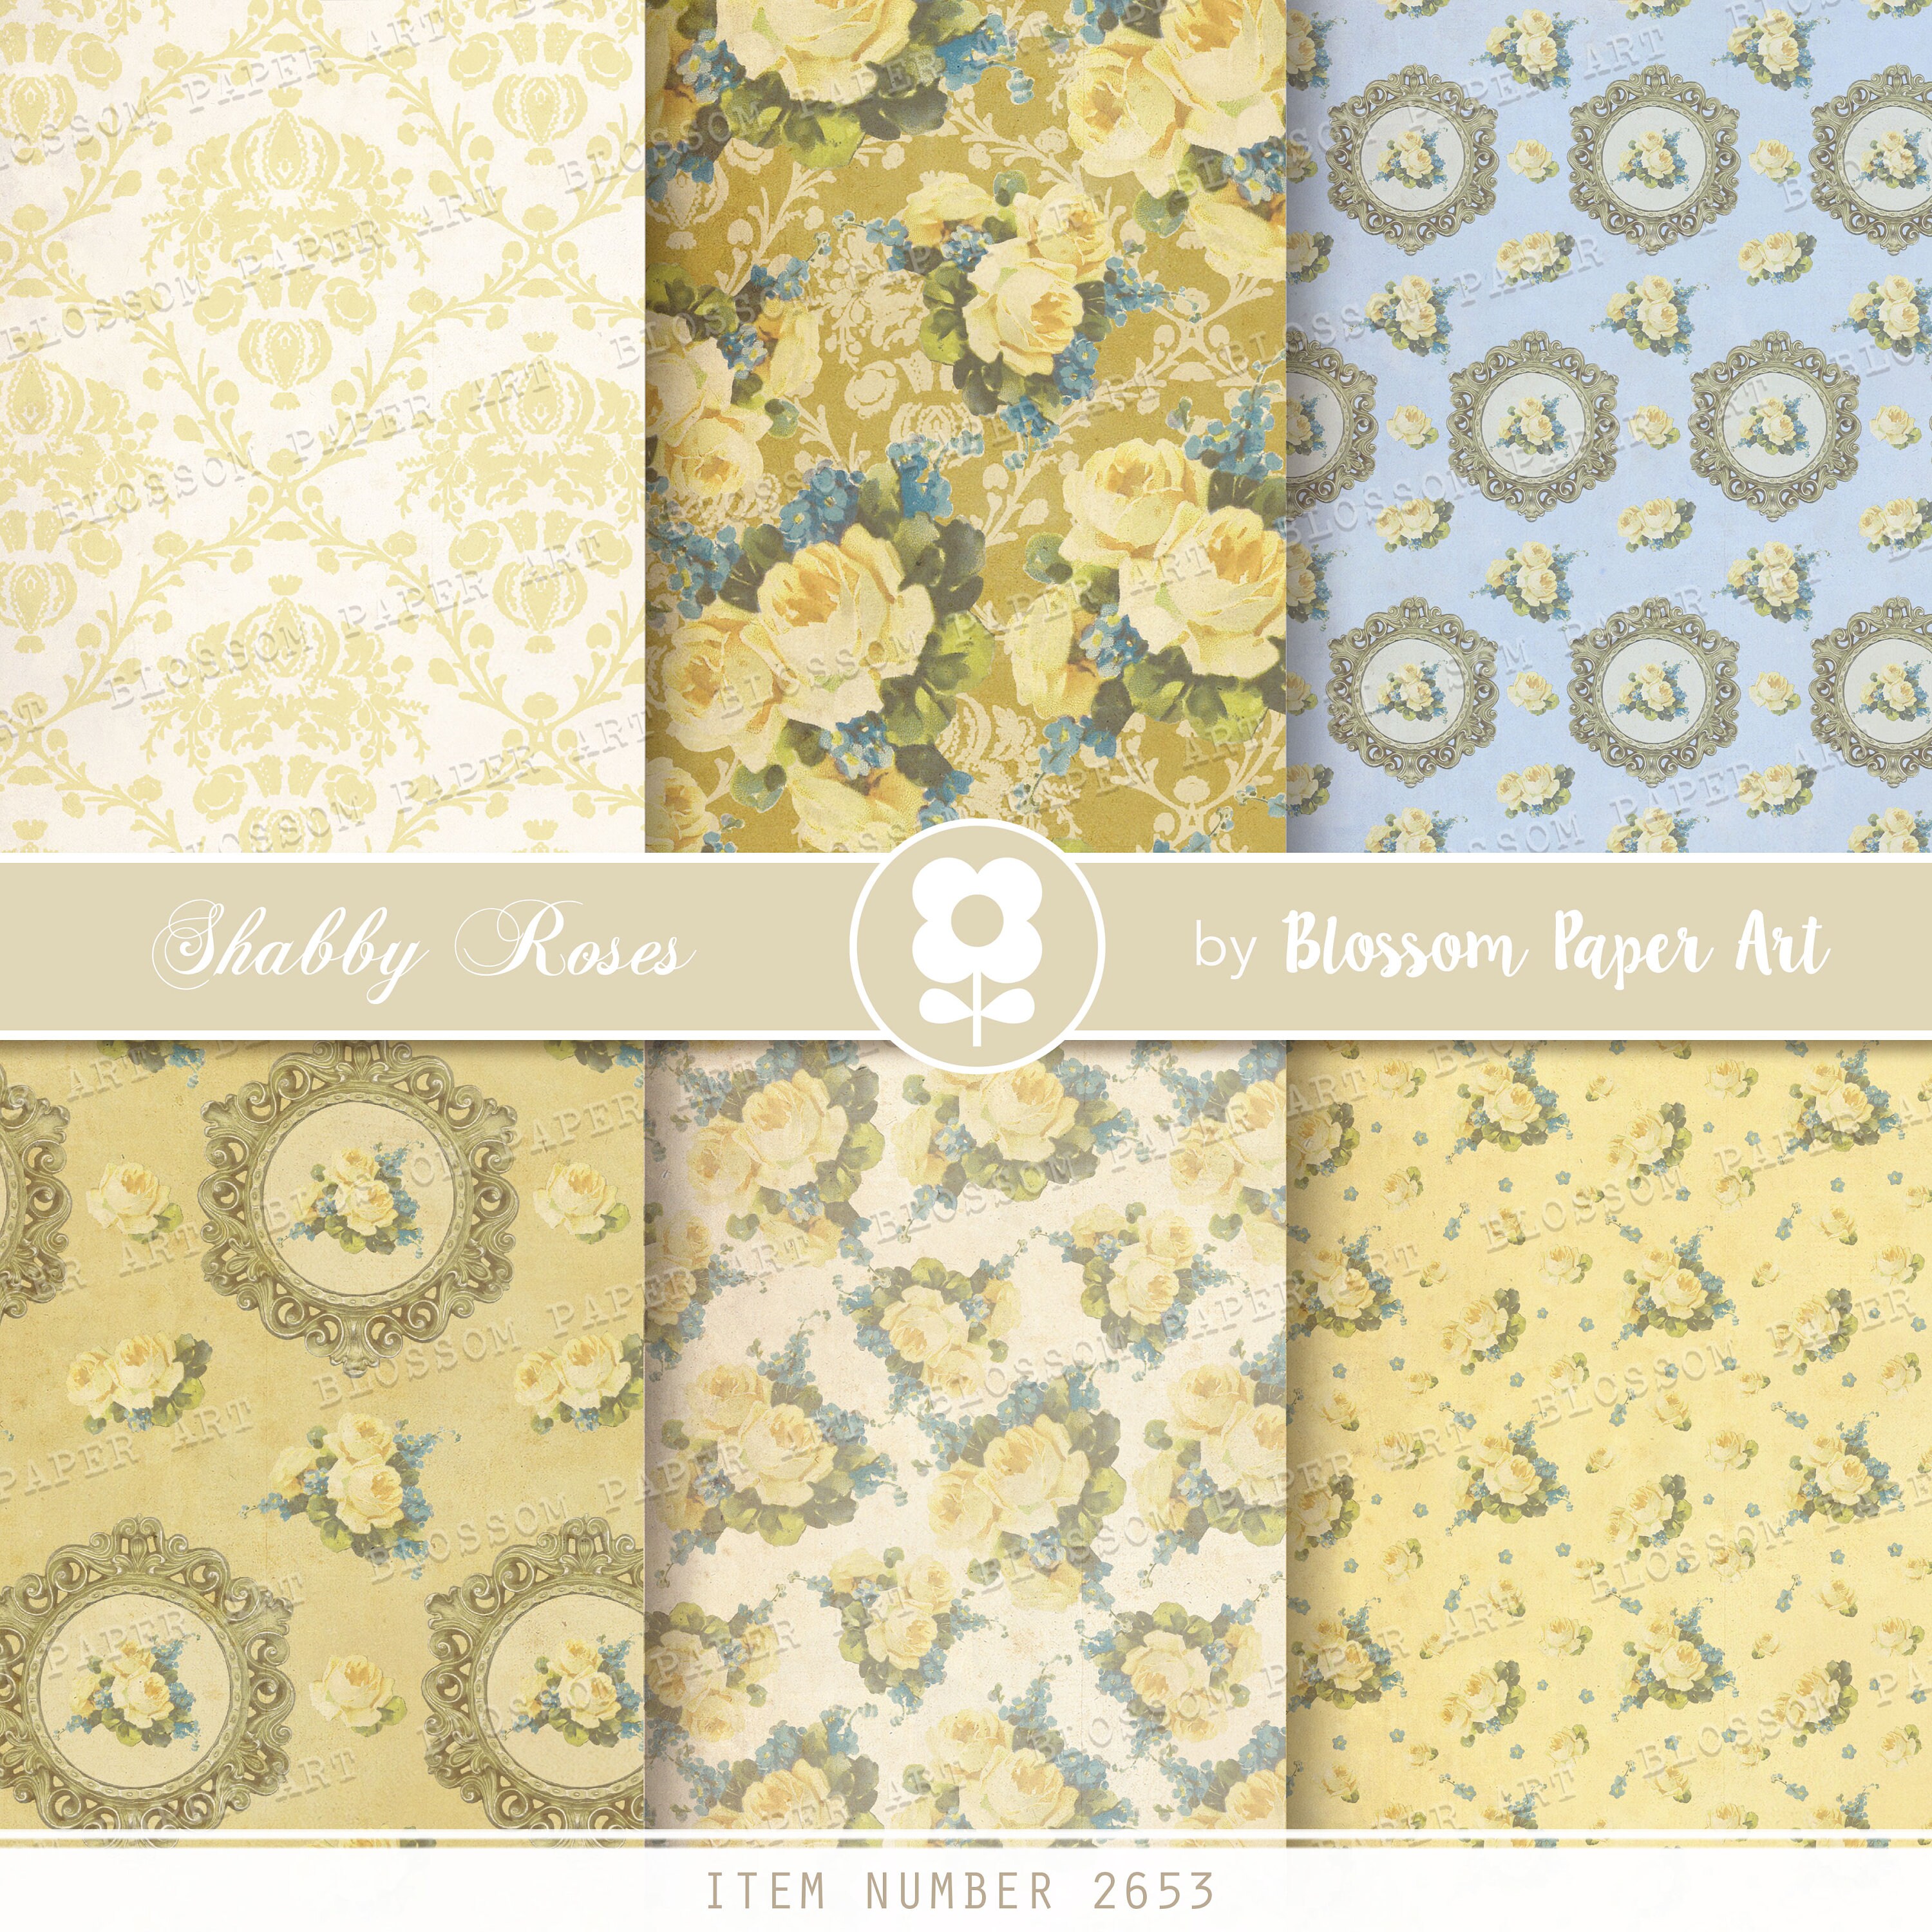 Yellow and Black Floral Paper Digital Scrapbook Paper Shabby